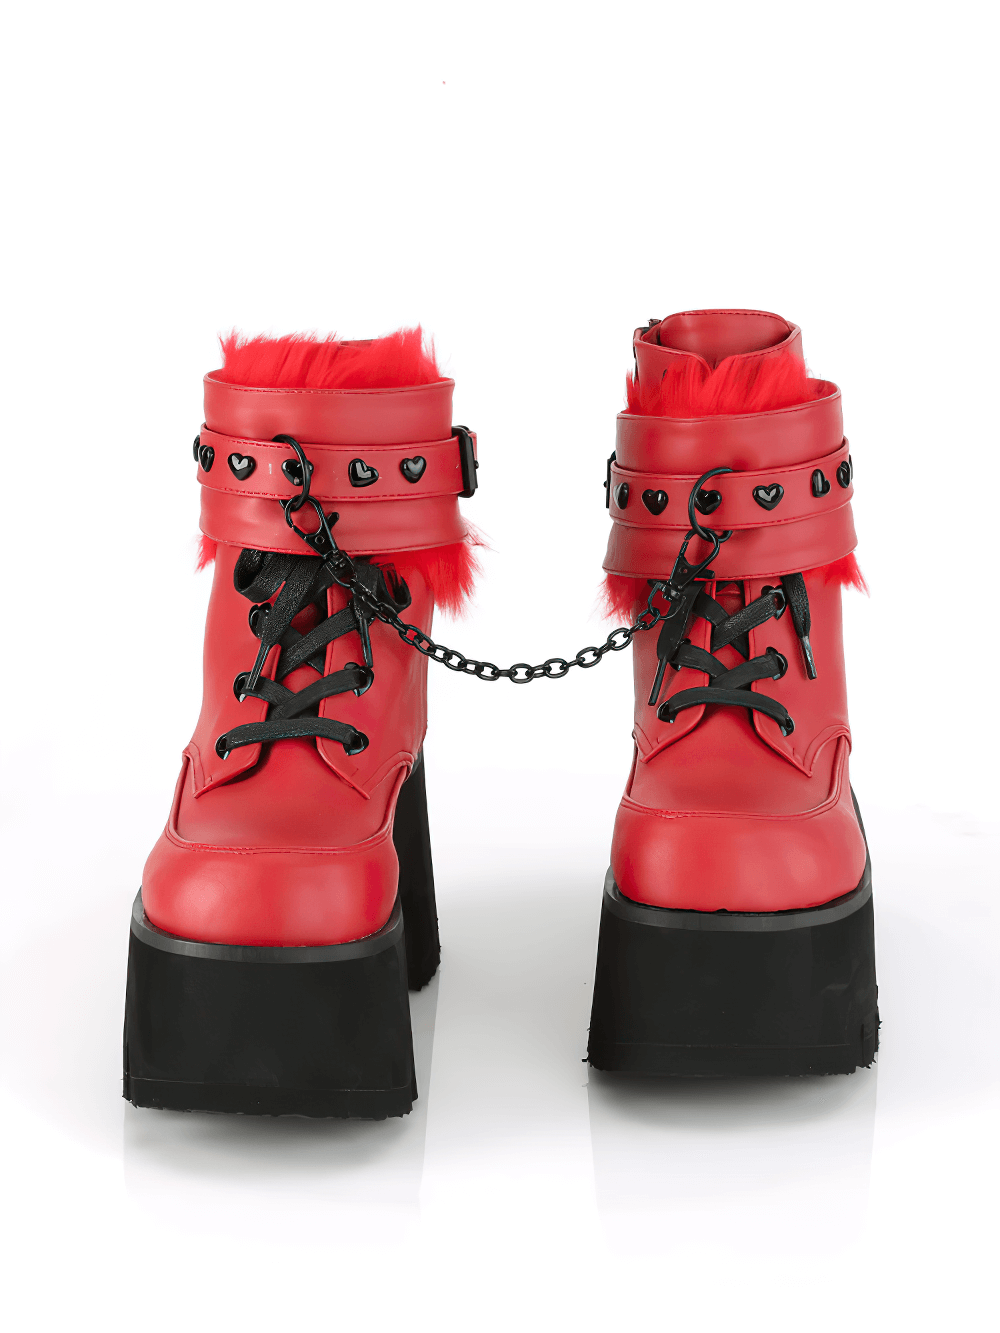 DEMONIA Chunky Heel Red Ankle Boots with Fur Lined Cuffs